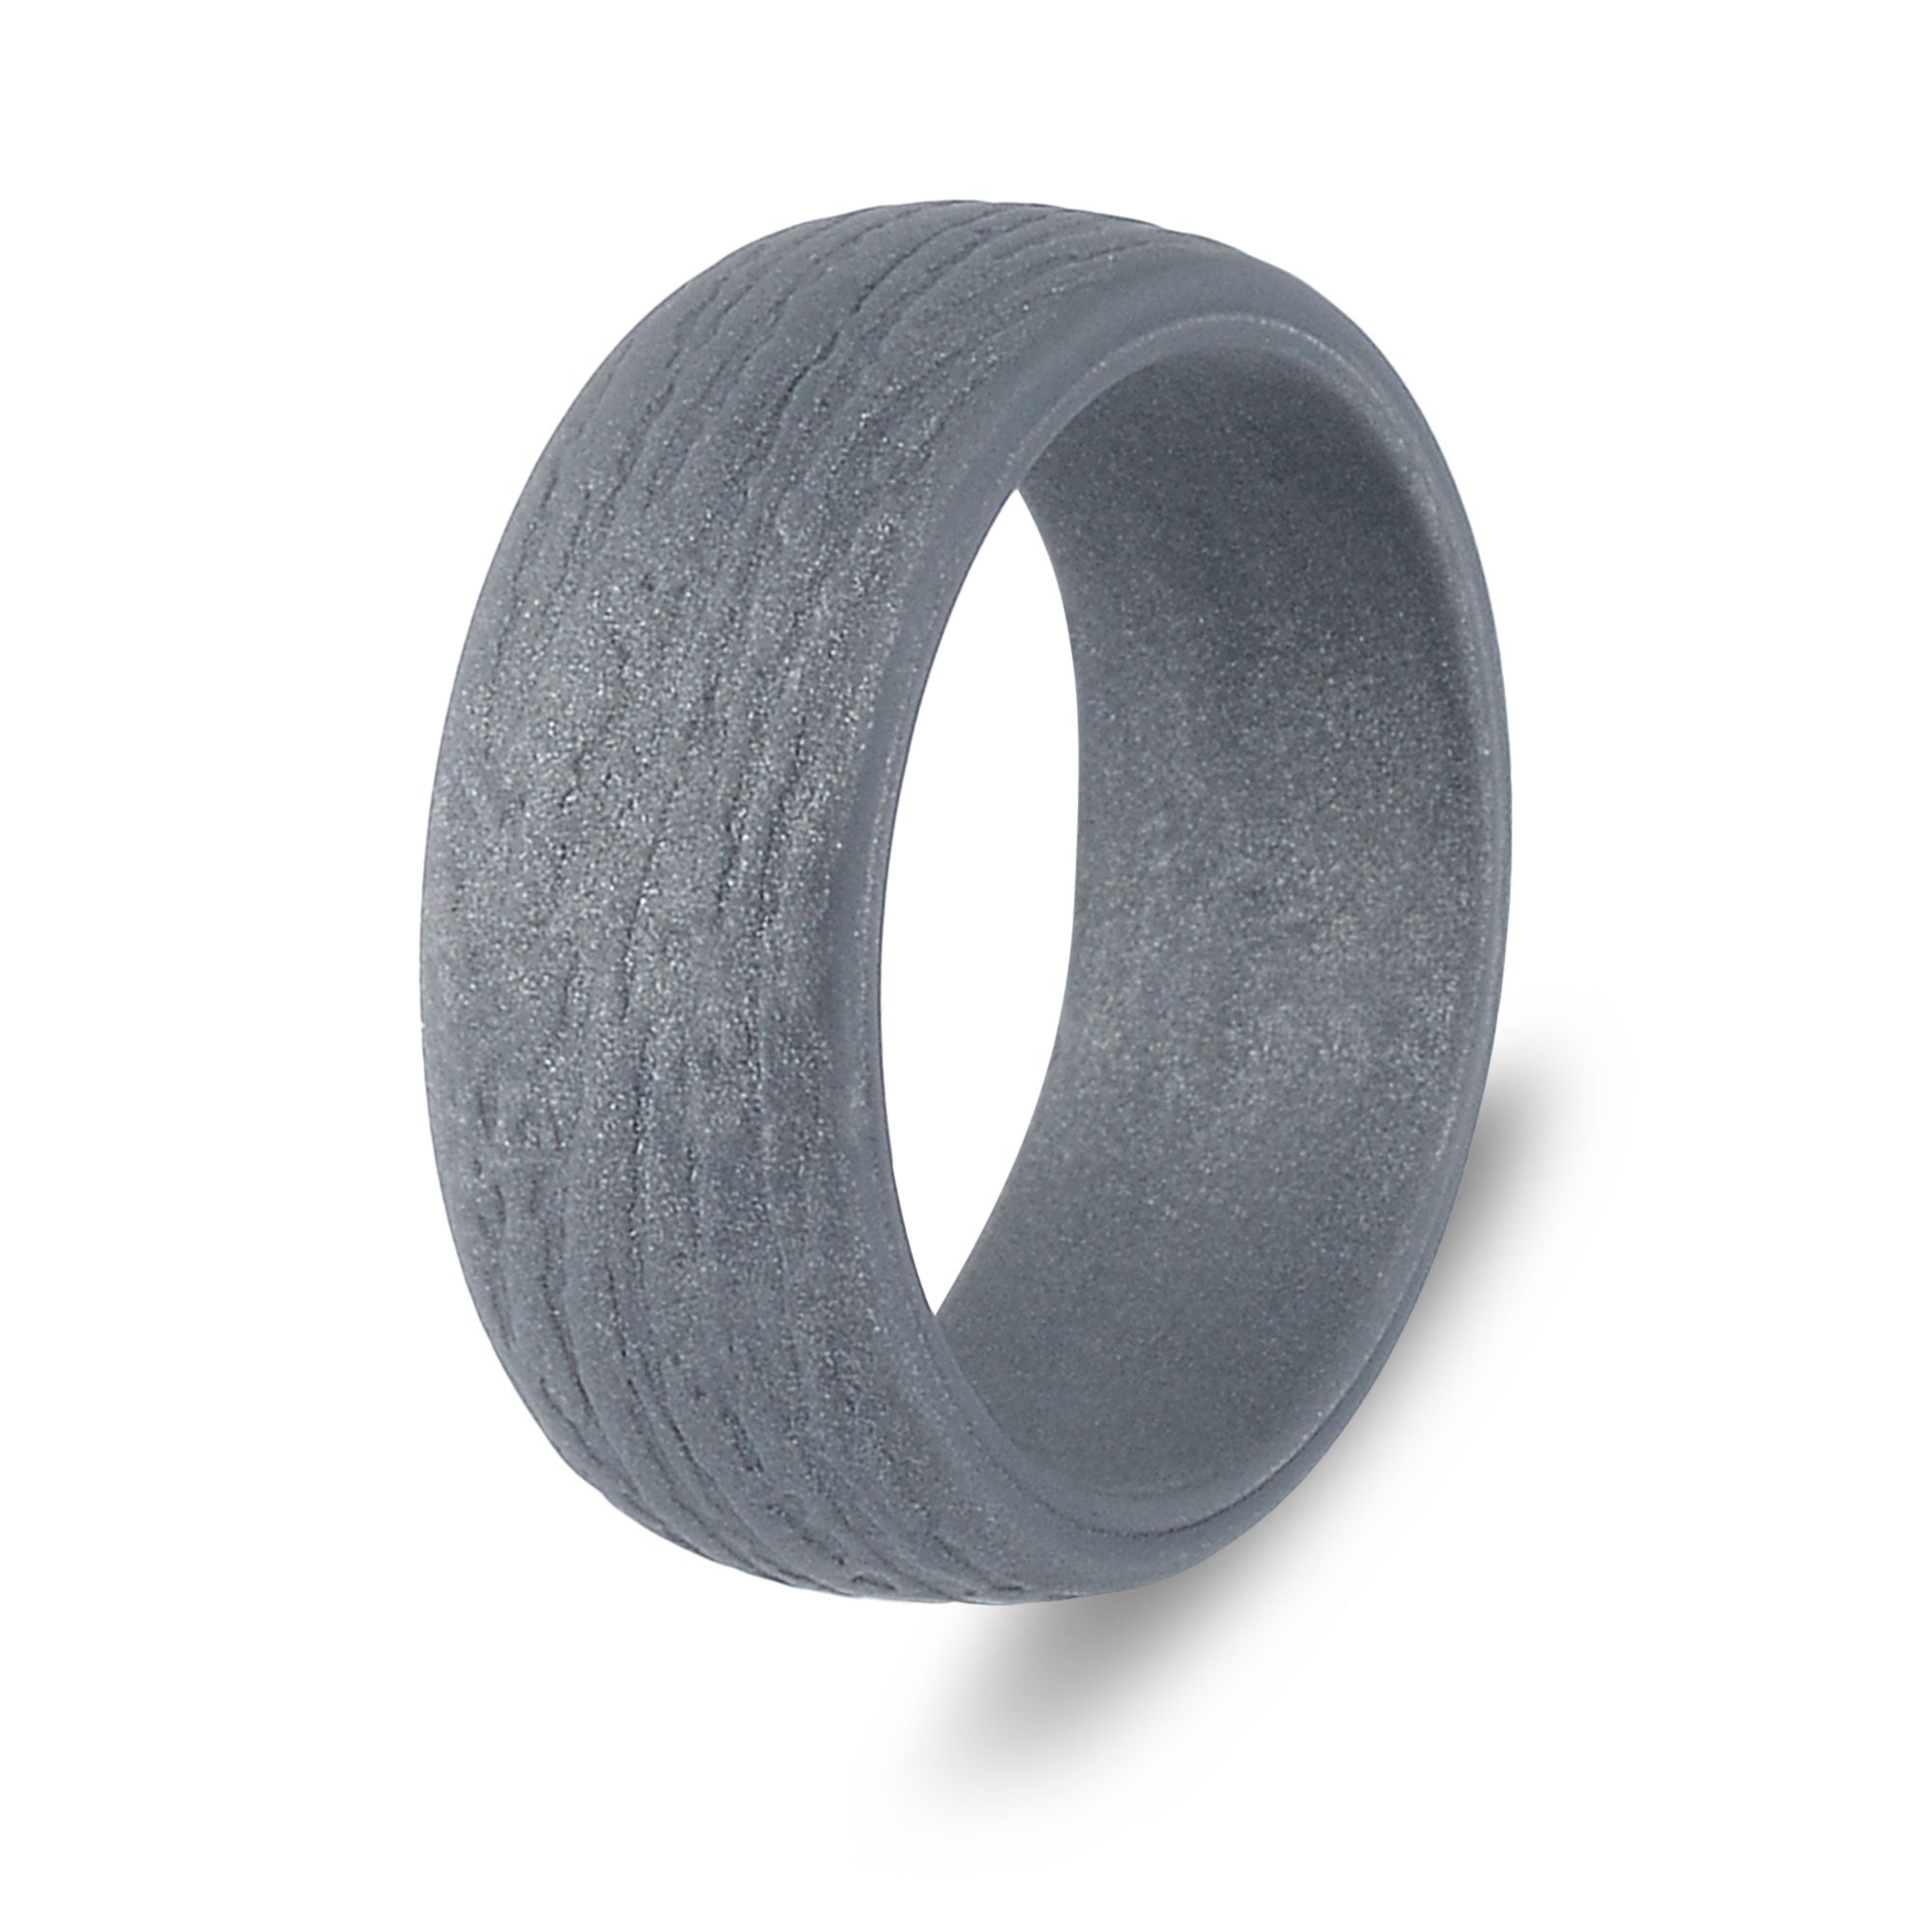 The Steel - Silicone Ring